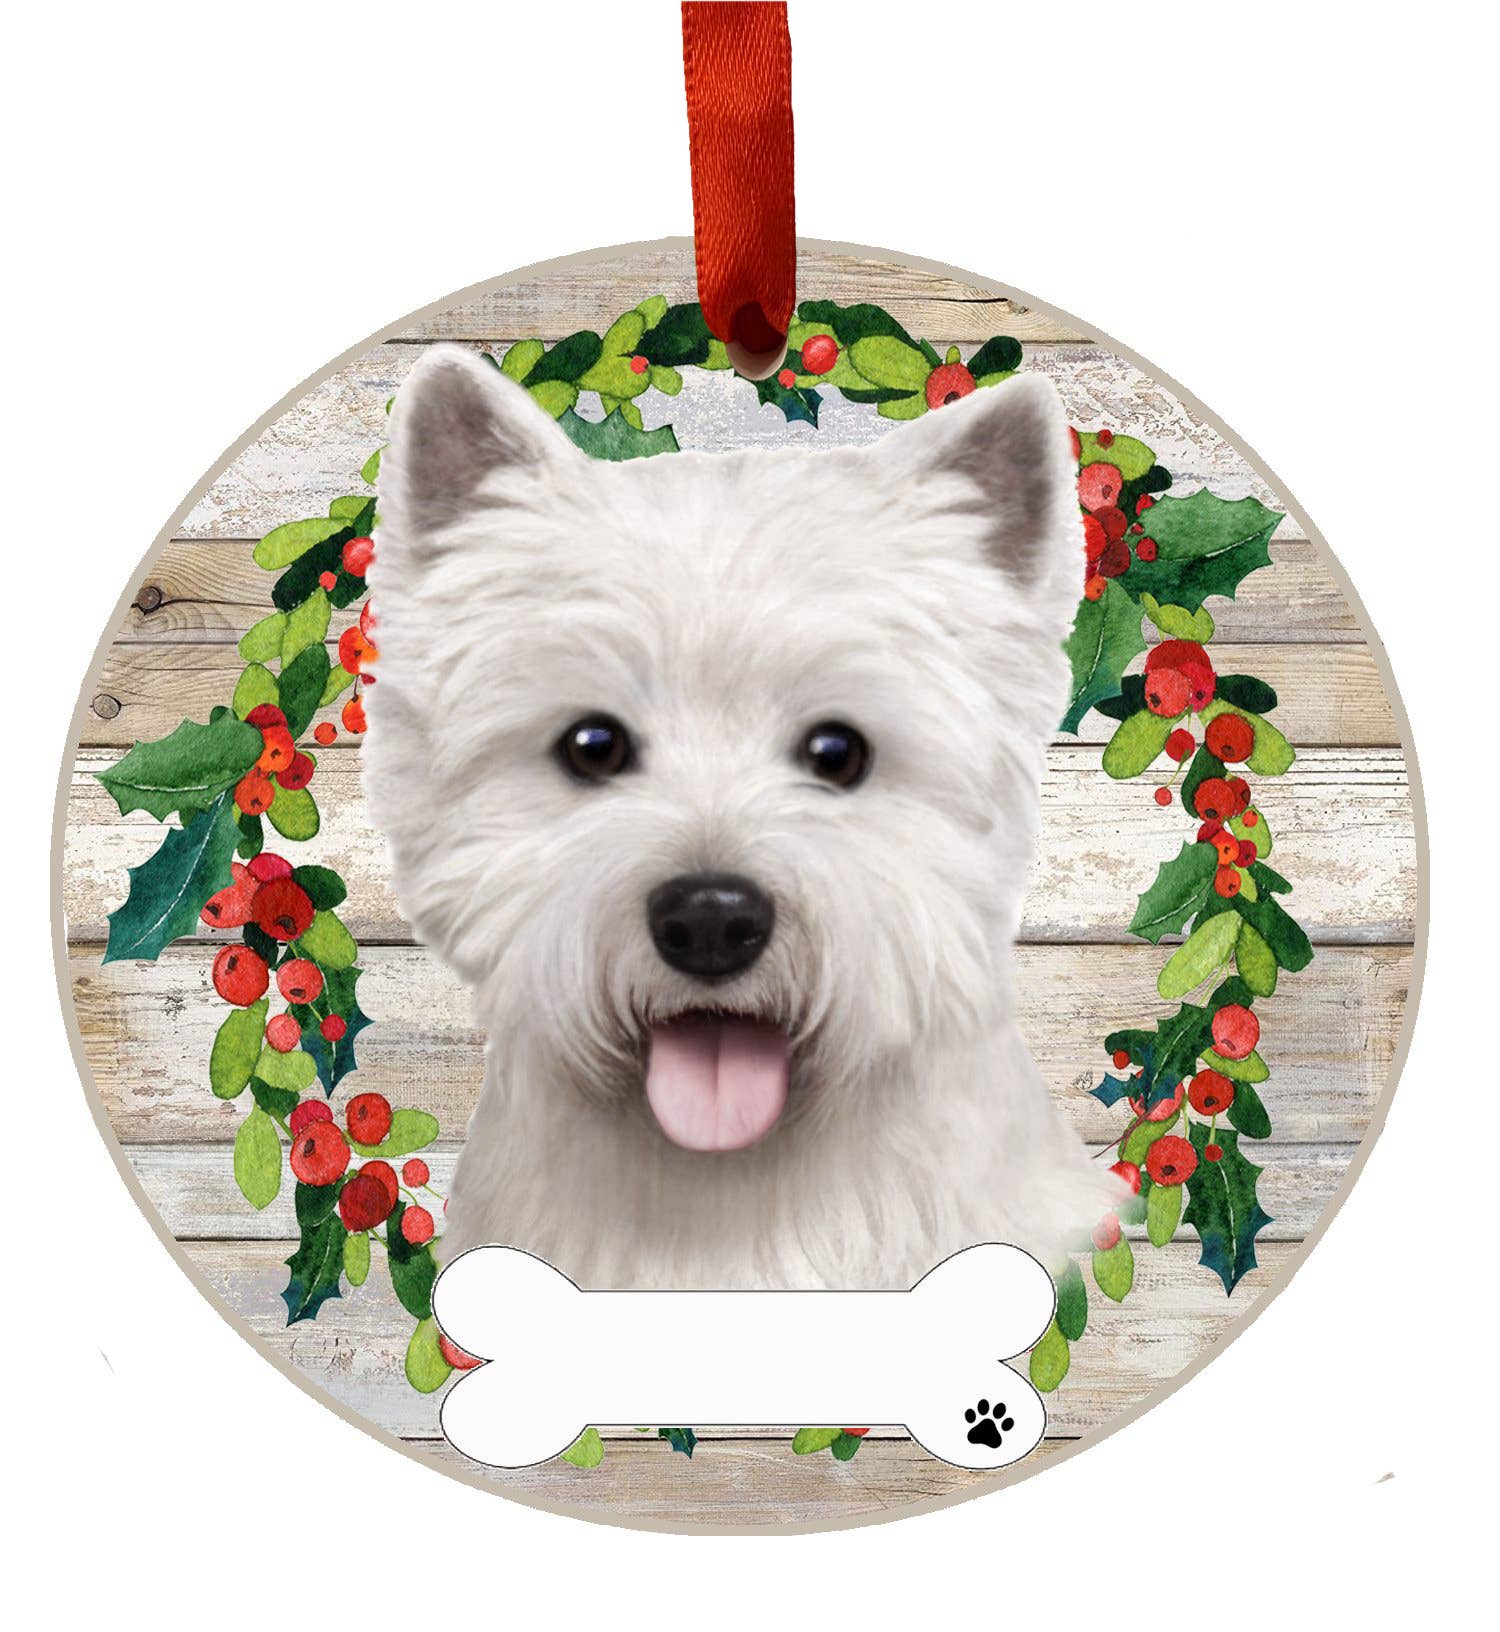 E&S Pets Dangling Legs Christmas Ornament NEW Dog WESTIE TERRIER Puppy Holiday 